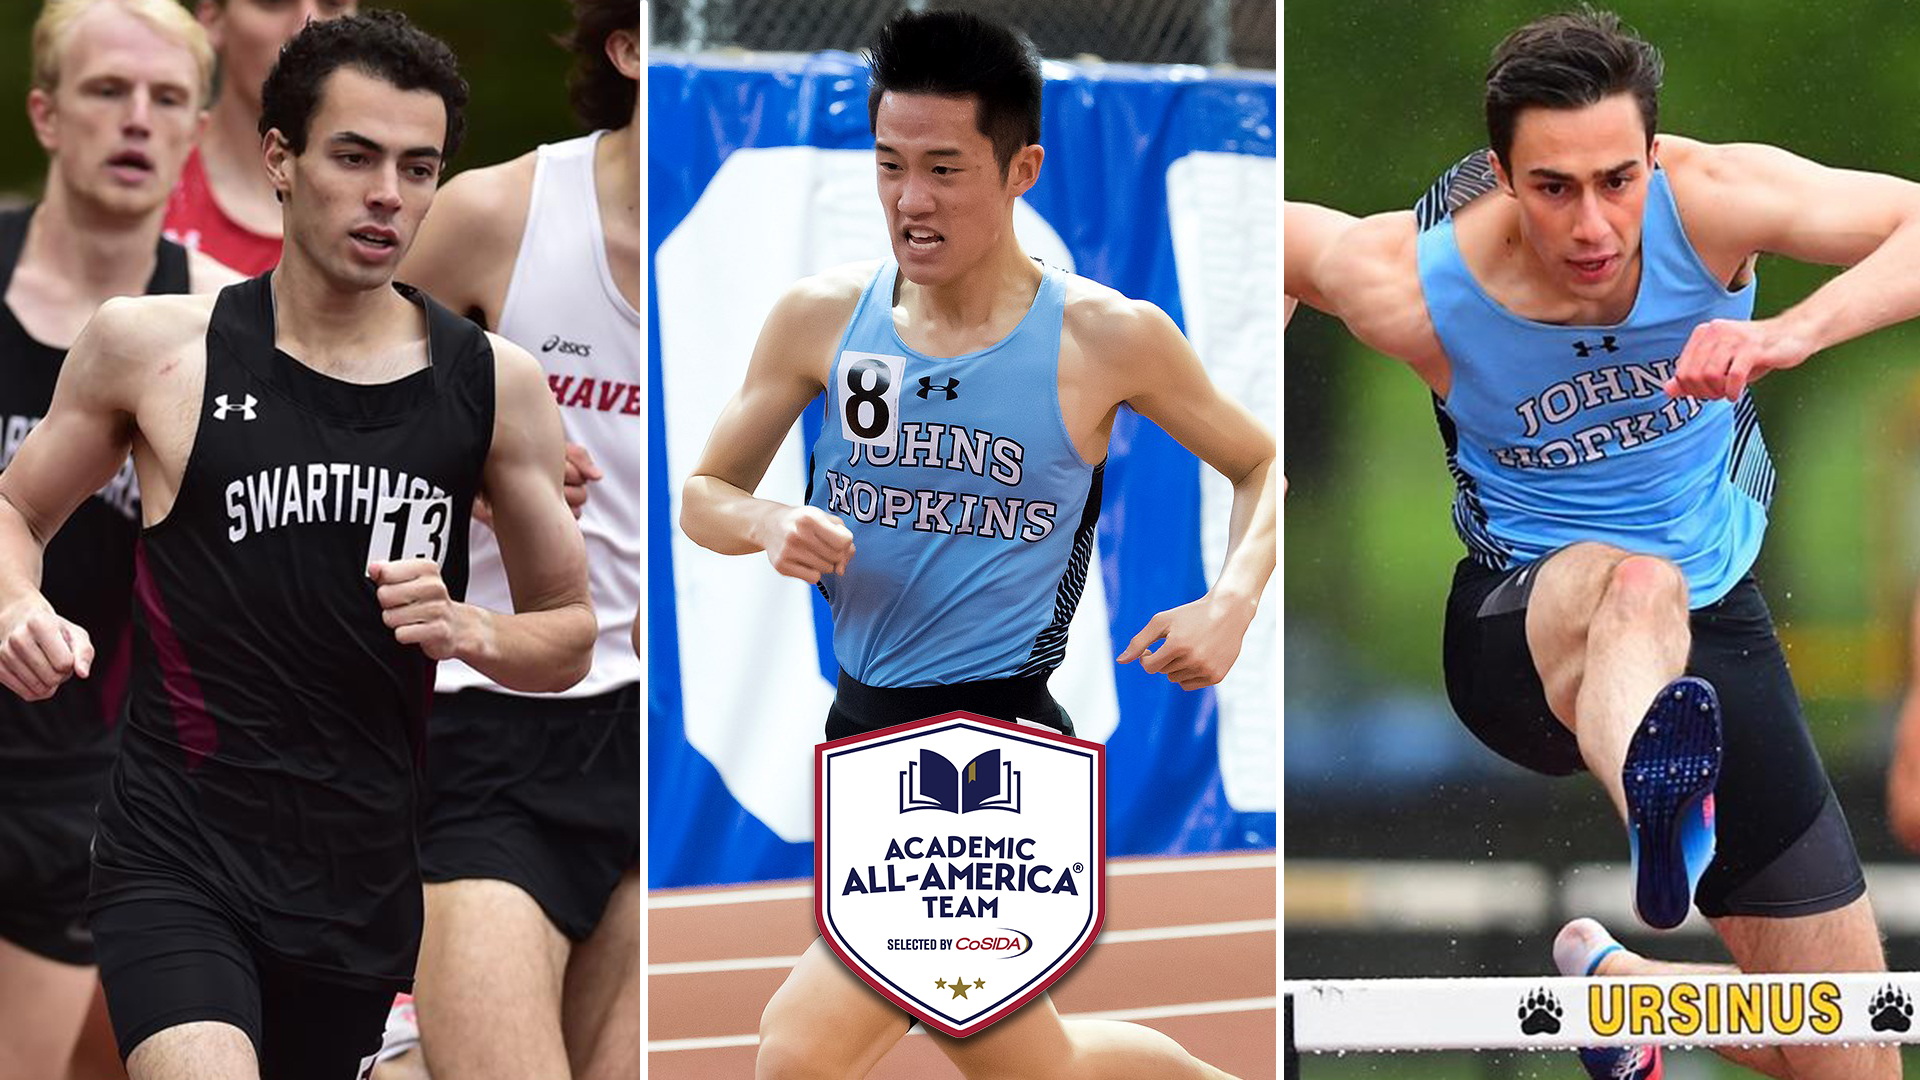 JHU's Chen & Boussouf, Swarthmore's Cantine Named Academic All-America